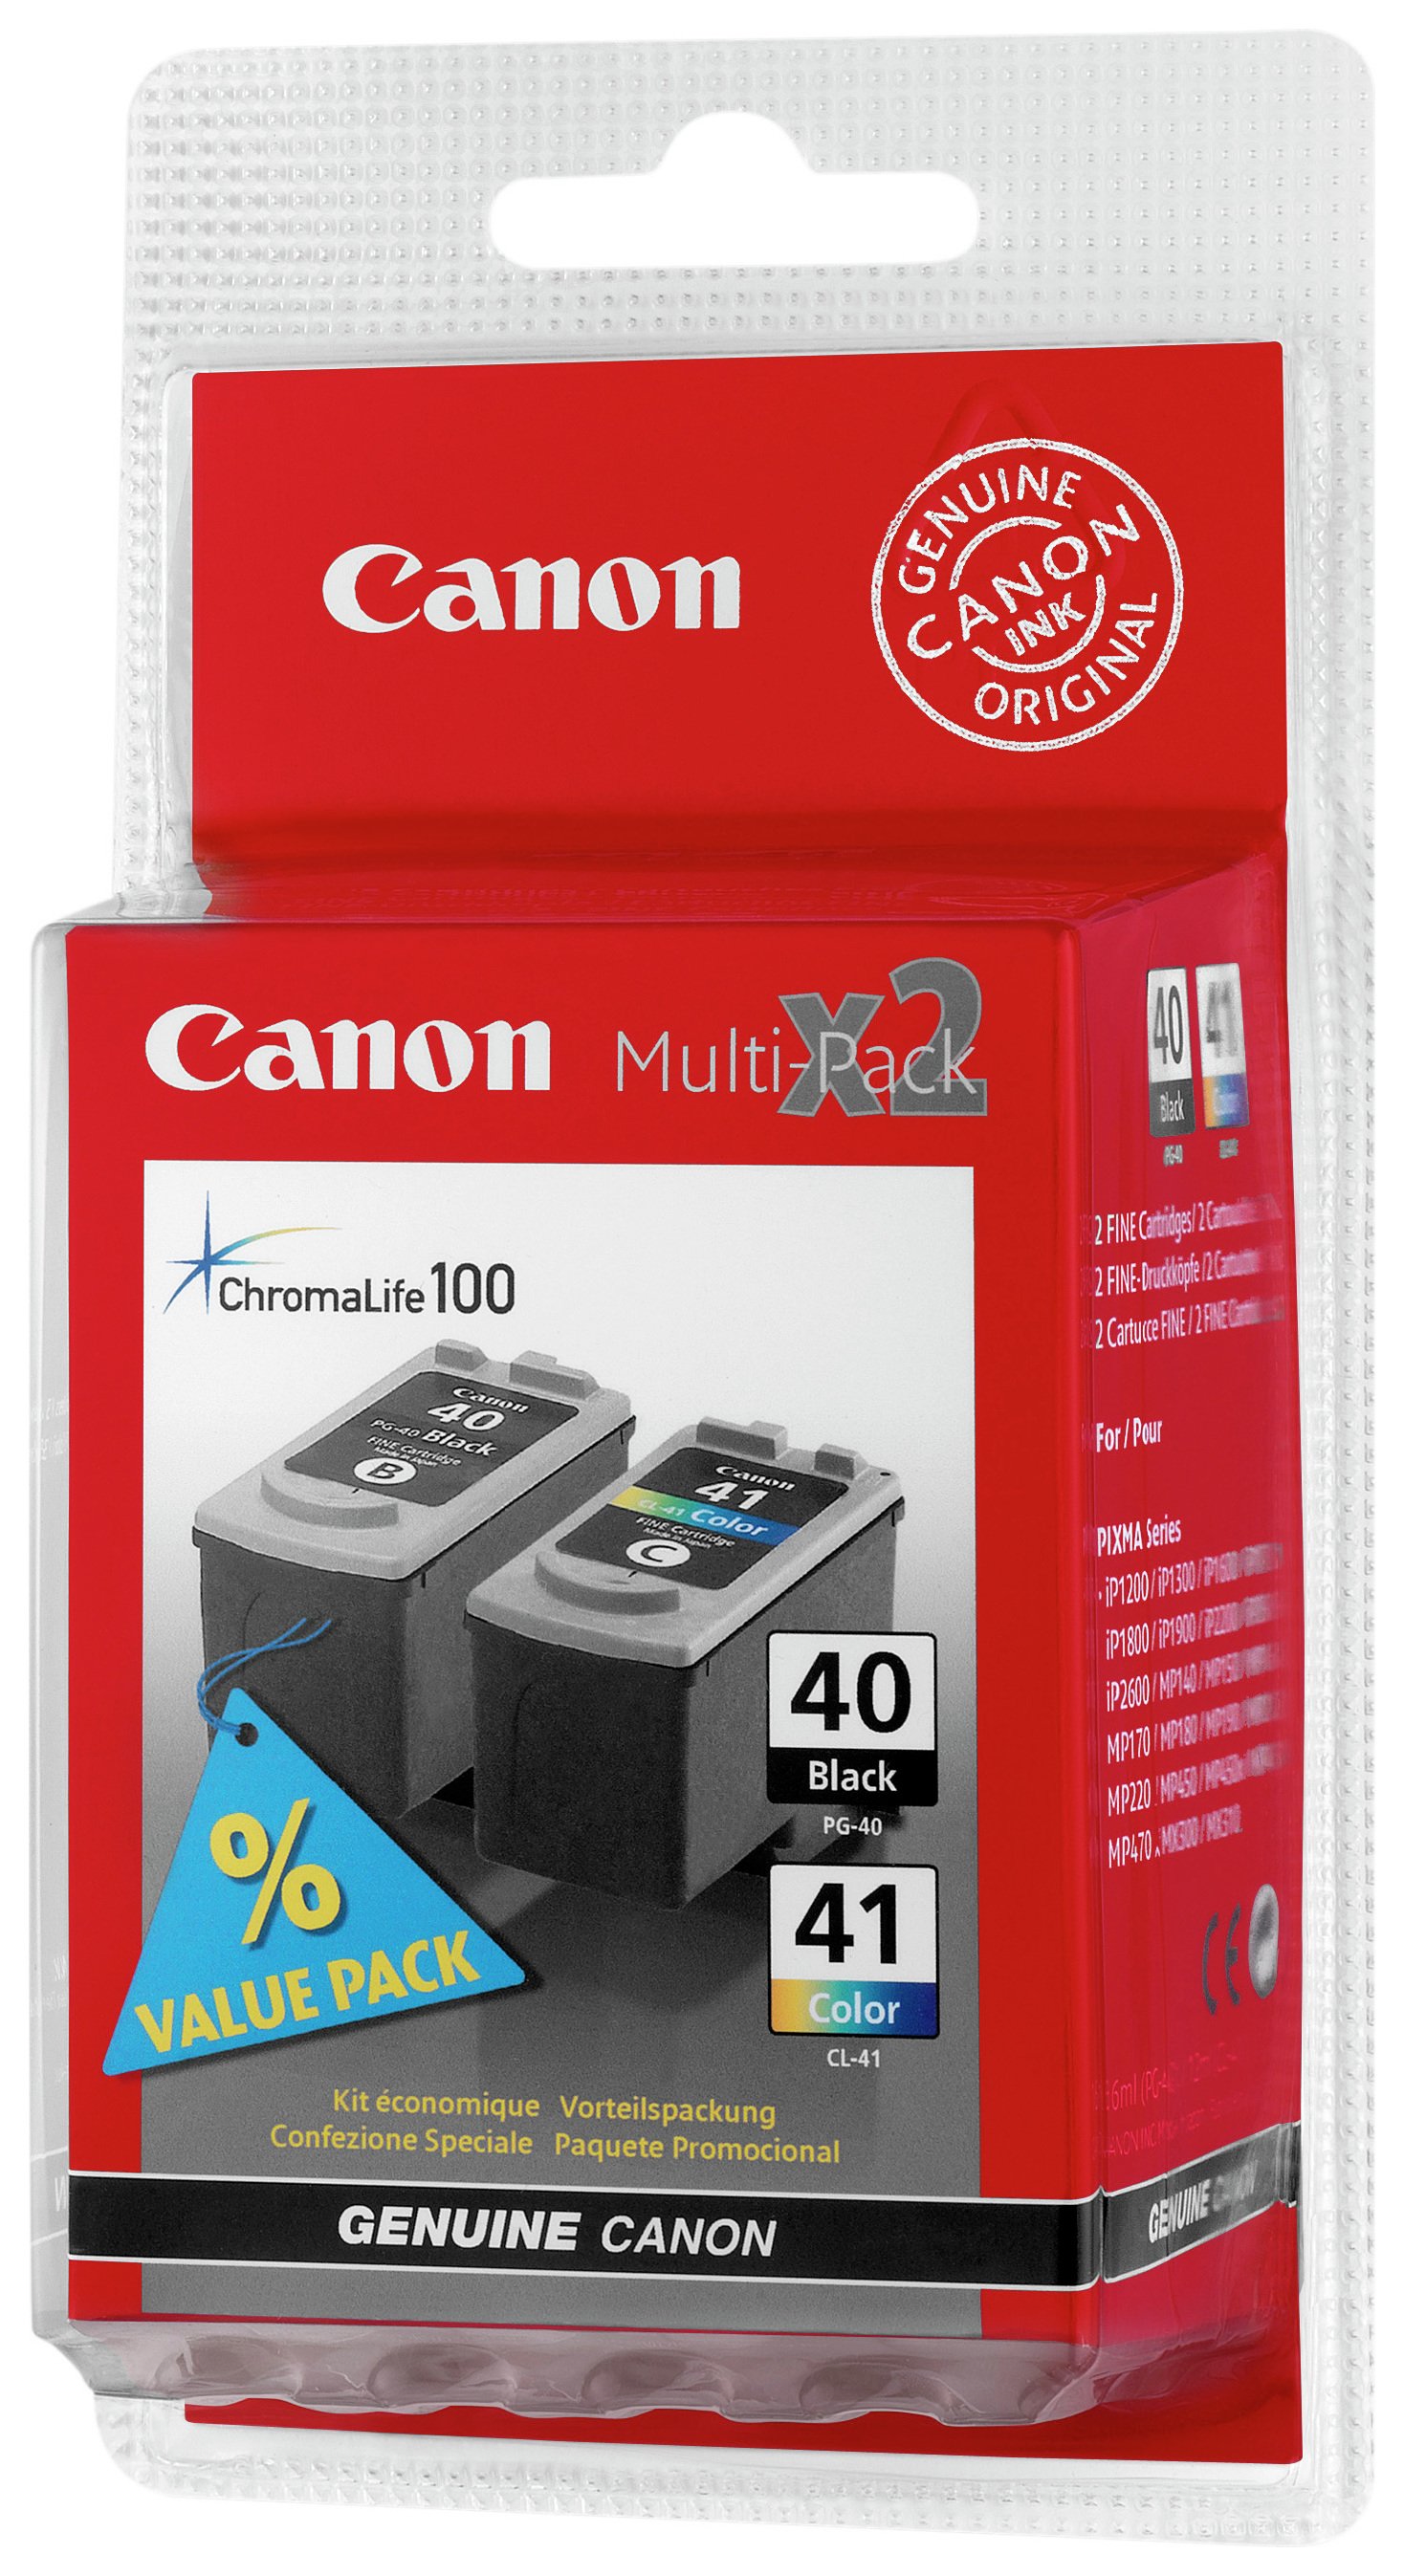 Canon PG-40/CL41 Multi-pack Ink Cartridge review